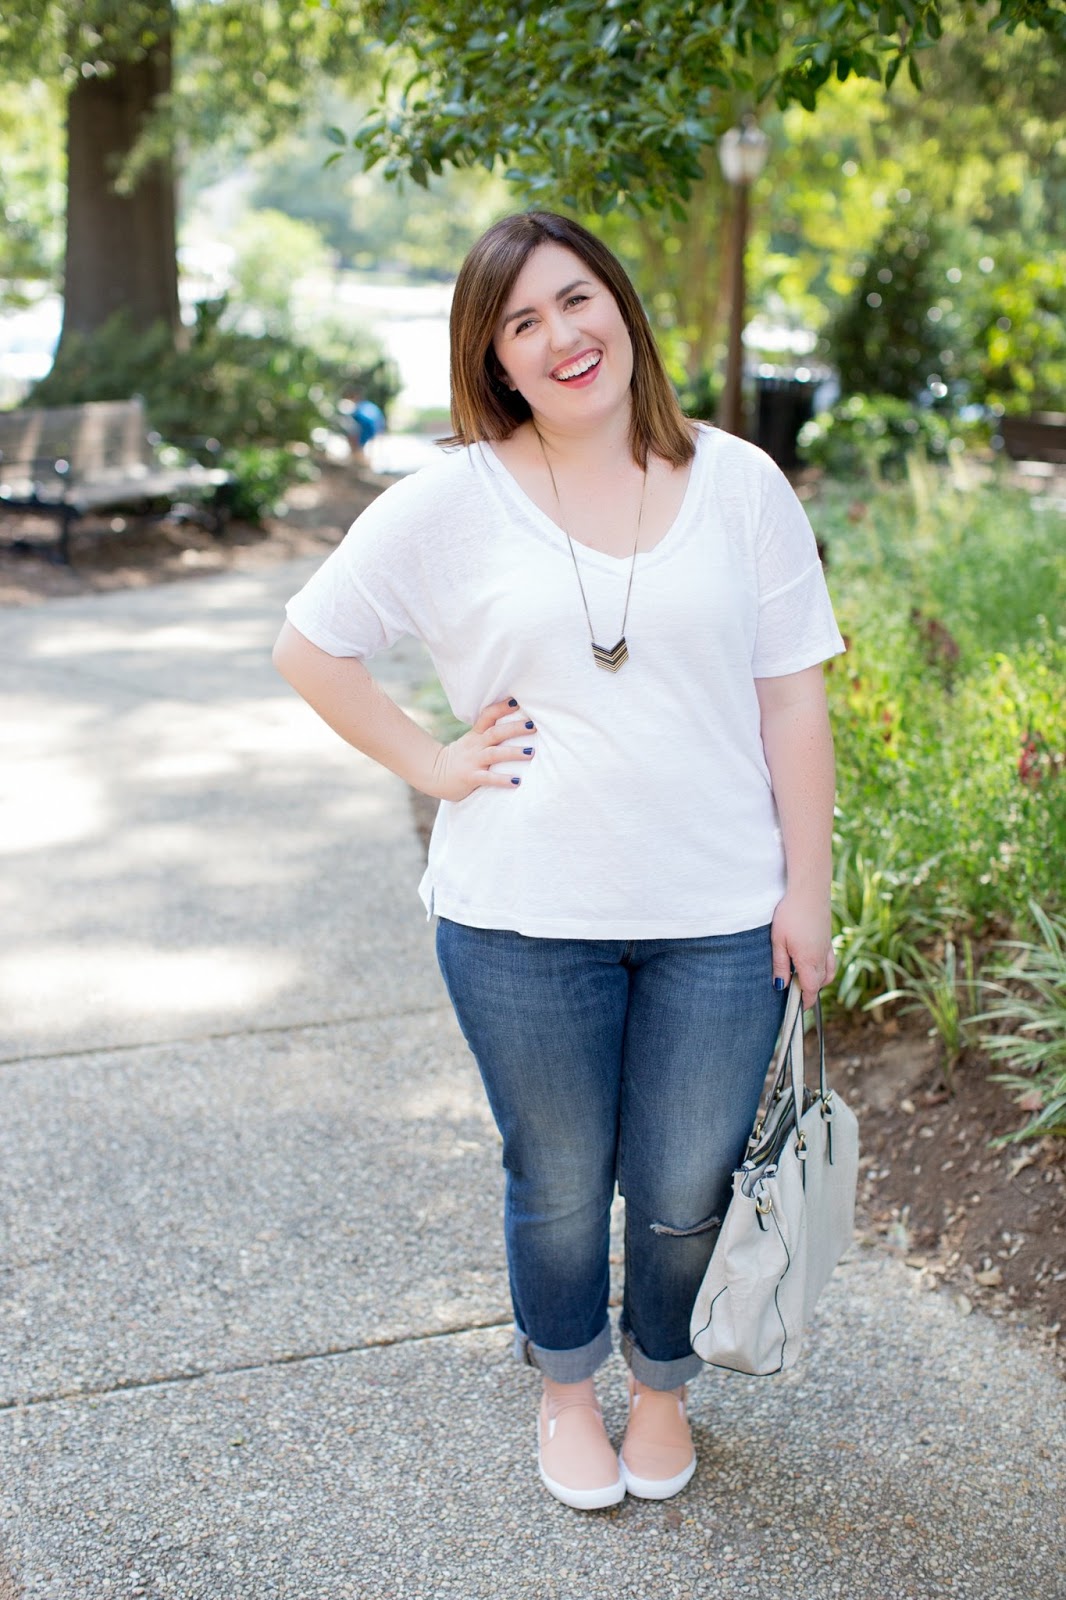 Rebecca Lately White Linen Tee Old Navy Boyfriend Jeans Pink Slip On Sneakers Urban Expressions